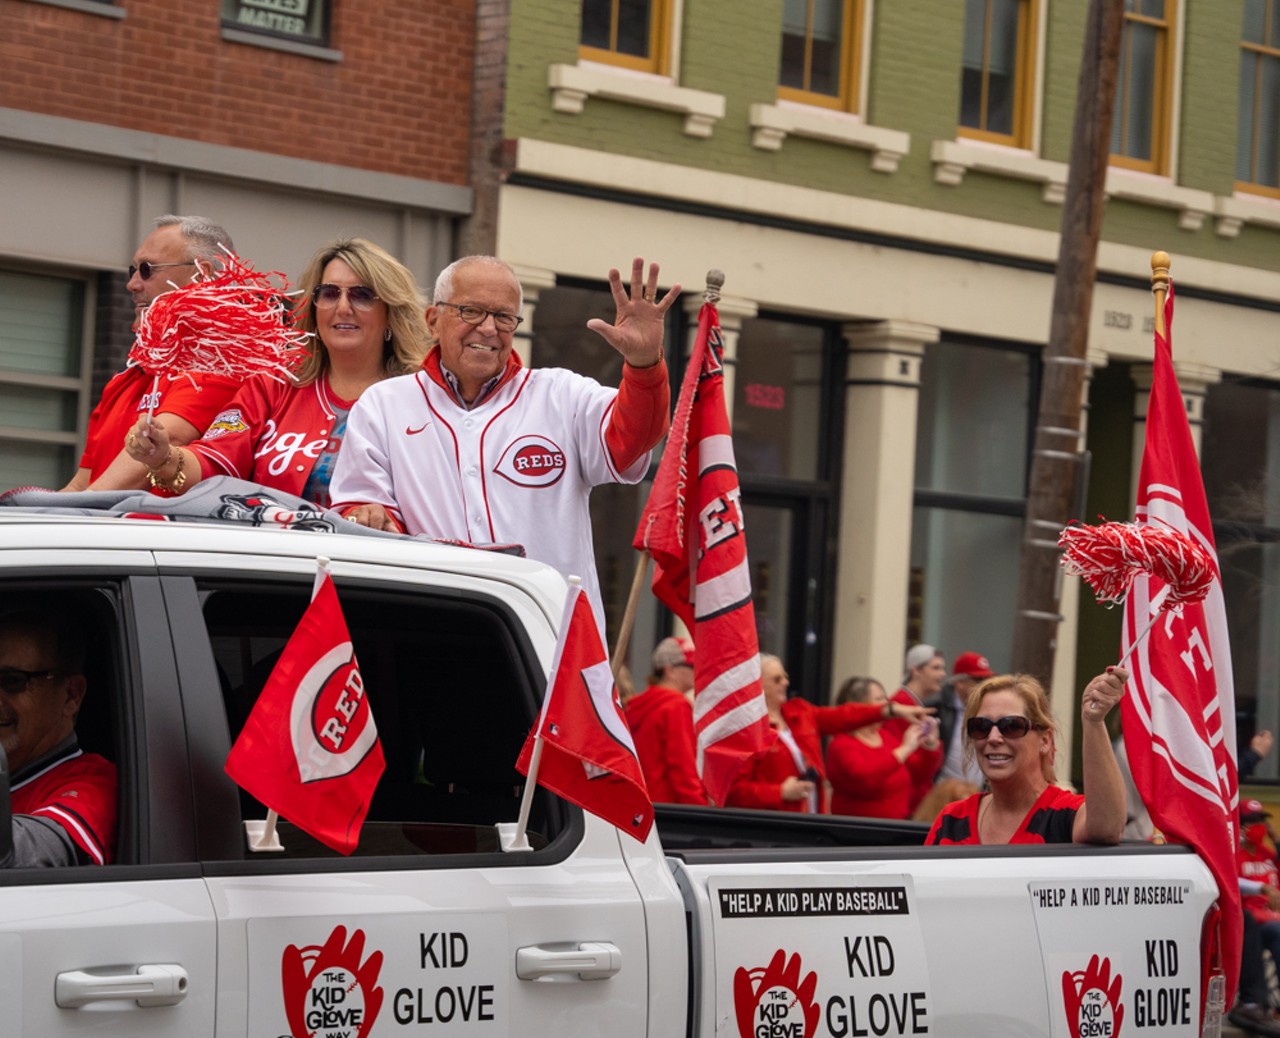 Everything We Saw the the Reds Opening Day Parade